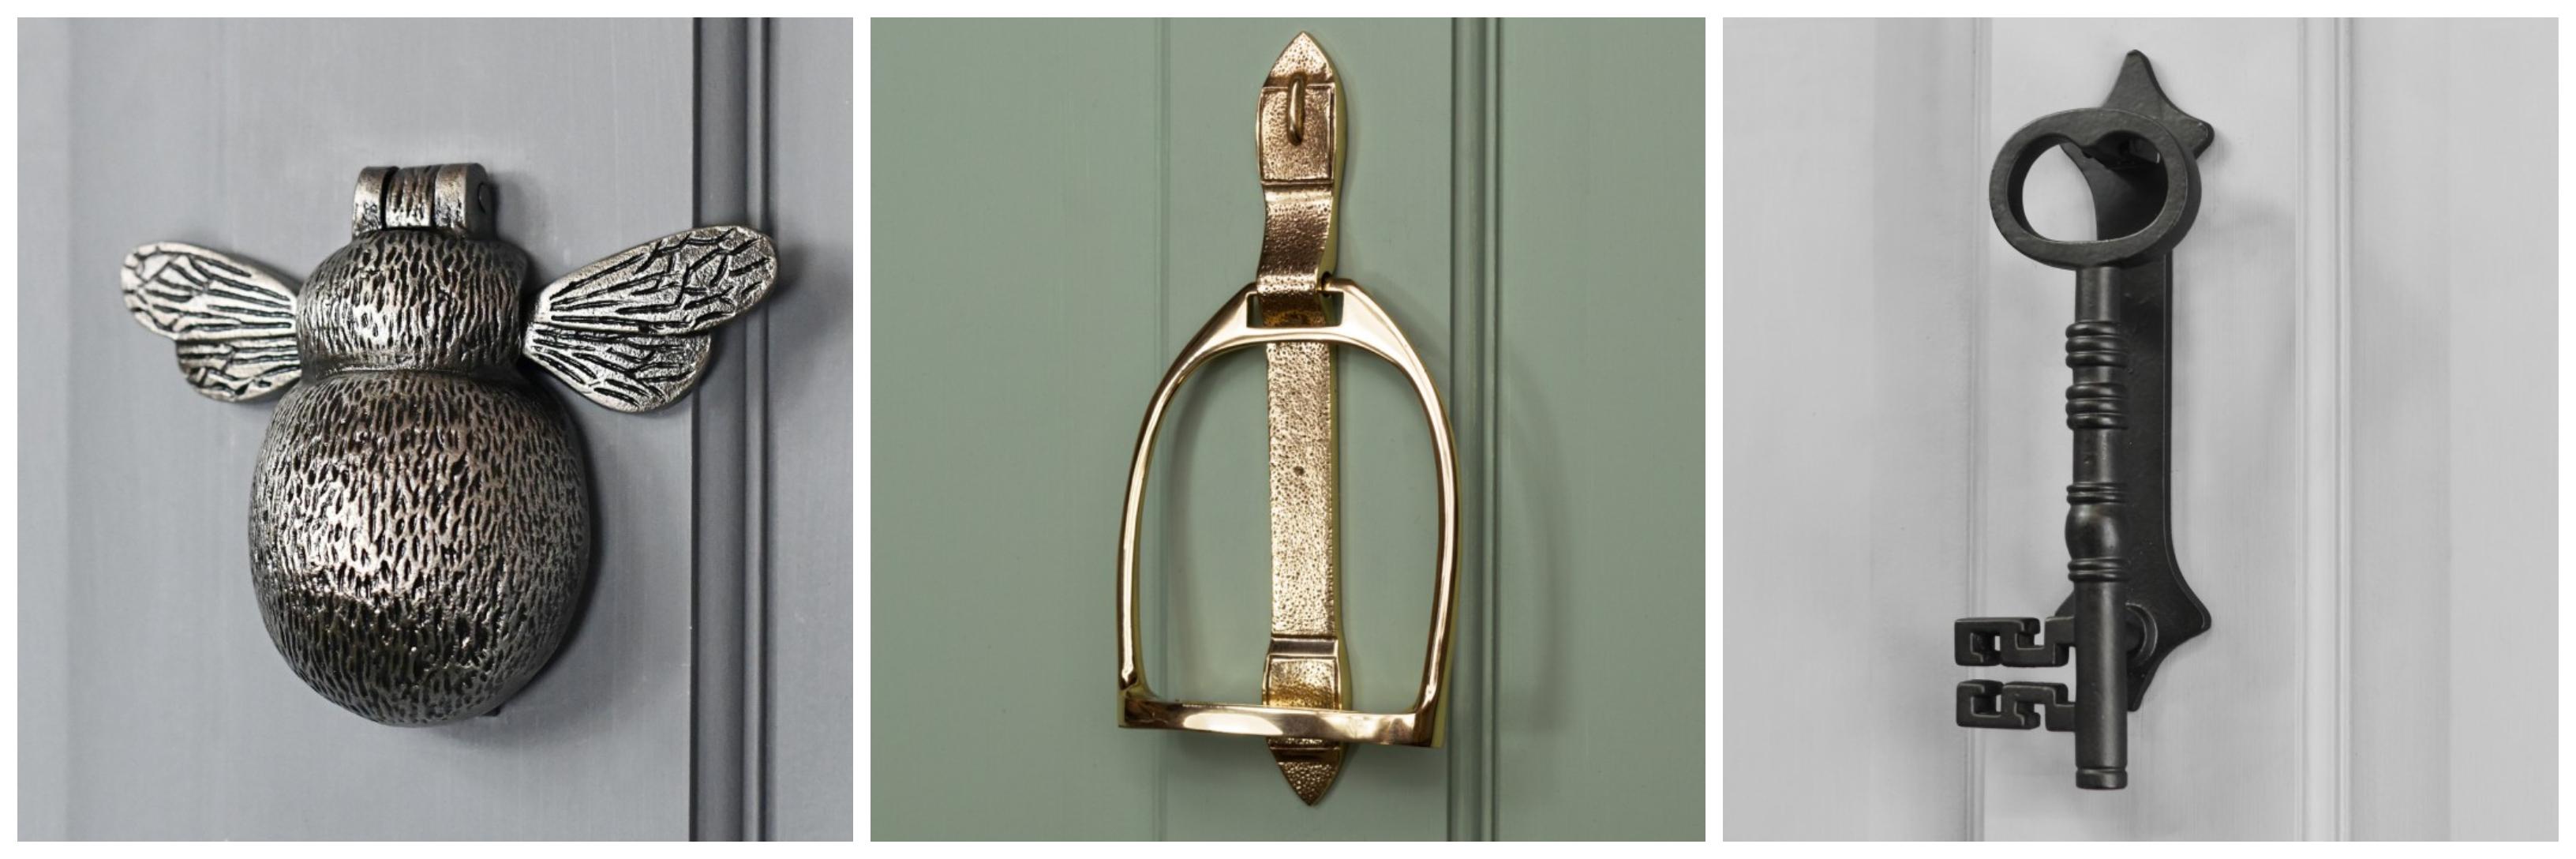 The History of Door Knockers, History Guide